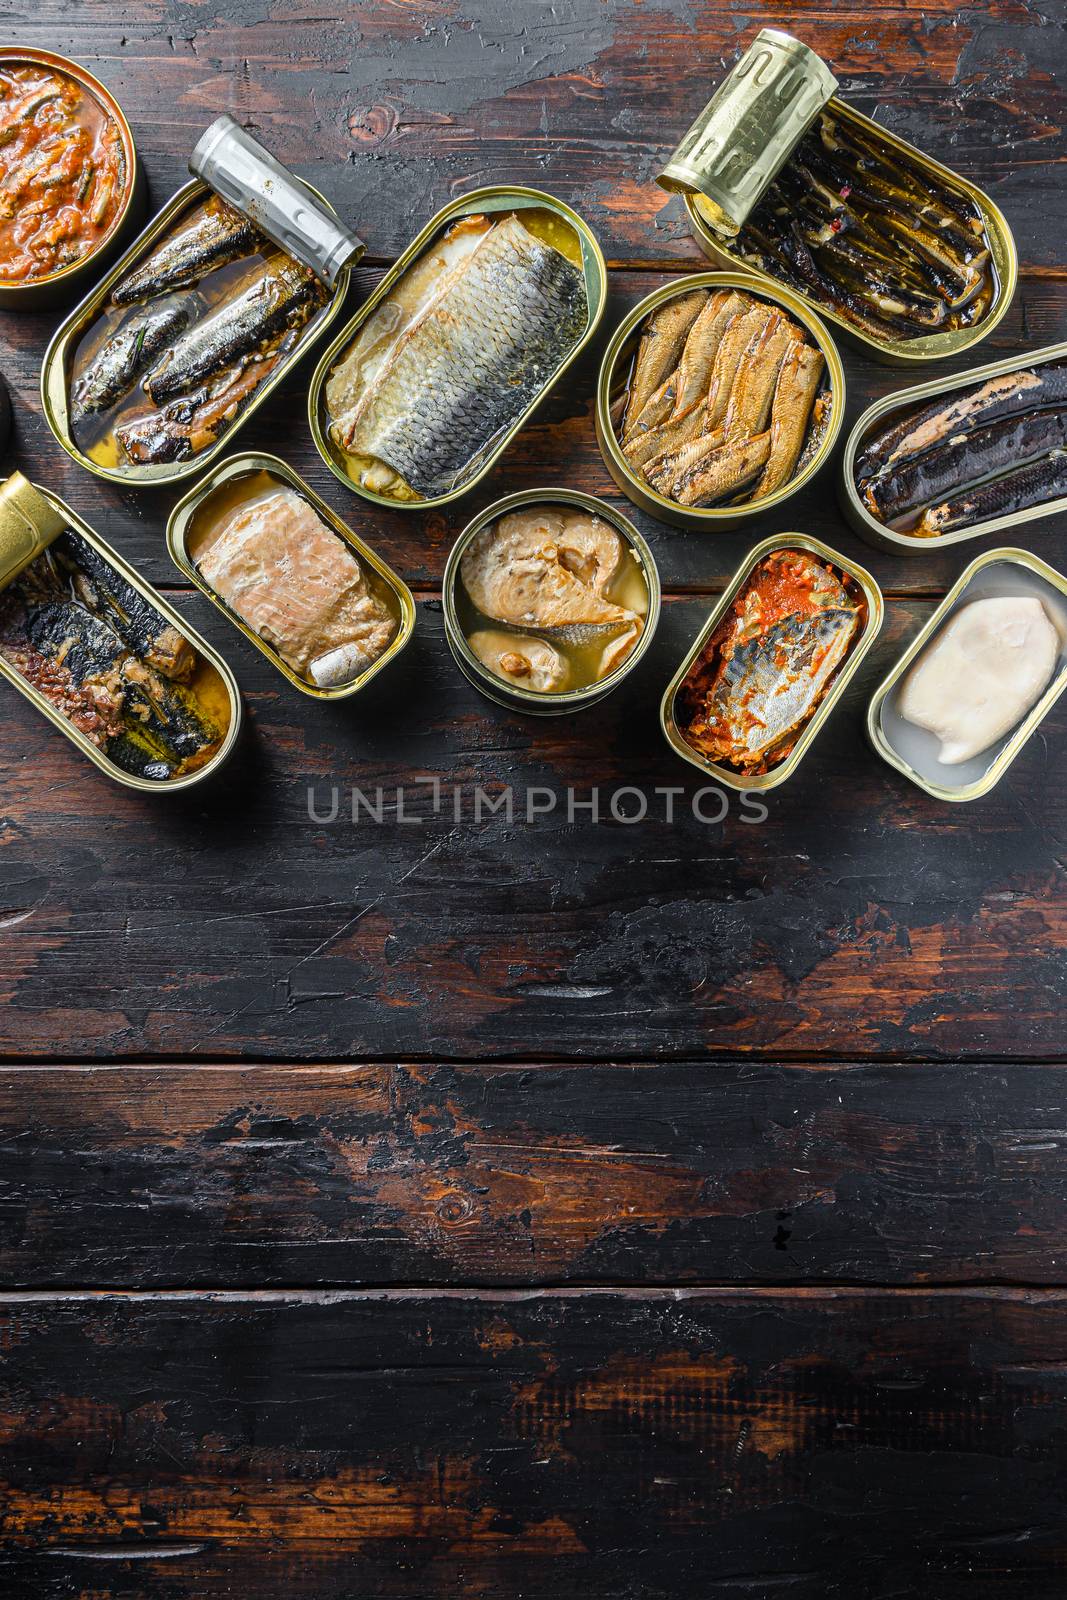 opened cans conserve with Saury, mackerel, sprats, sardines, pilchard, squid, tuna over wood table top view vertical space for text by Ilianesolenyi